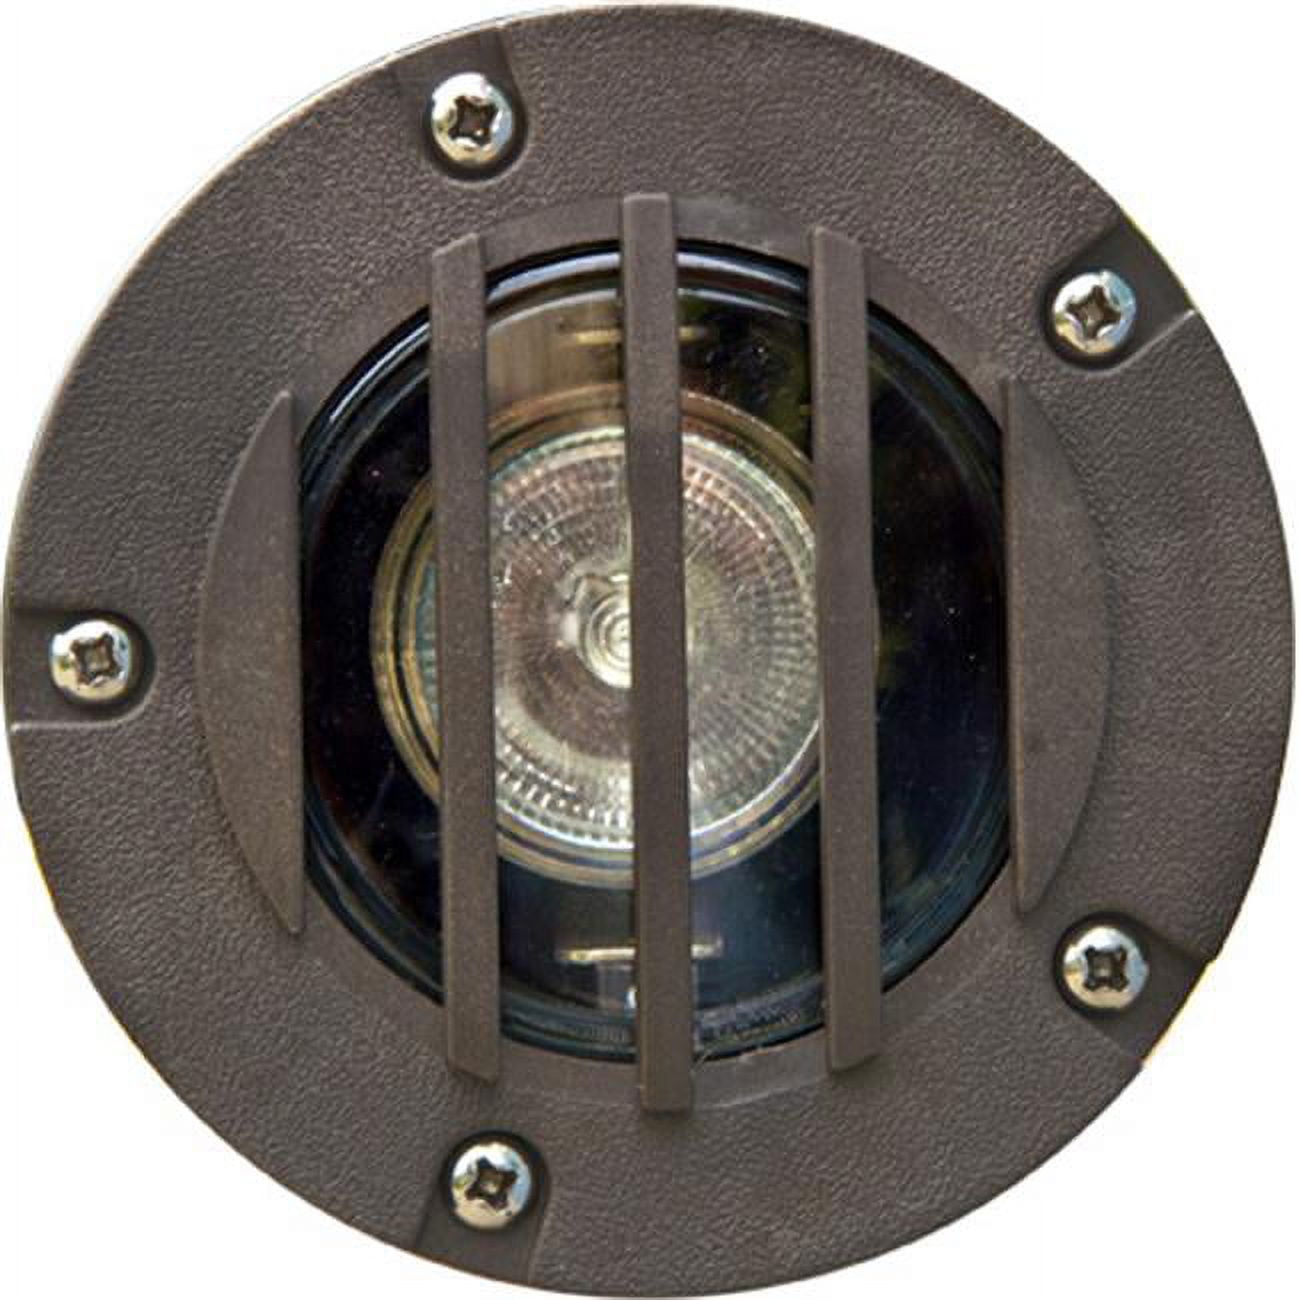 Picture of Dabmar Lighting LV346-BZ 35W 12V Polybutylene Terephthalate Adjustable In-Ground Well Light with Grill, Bronze